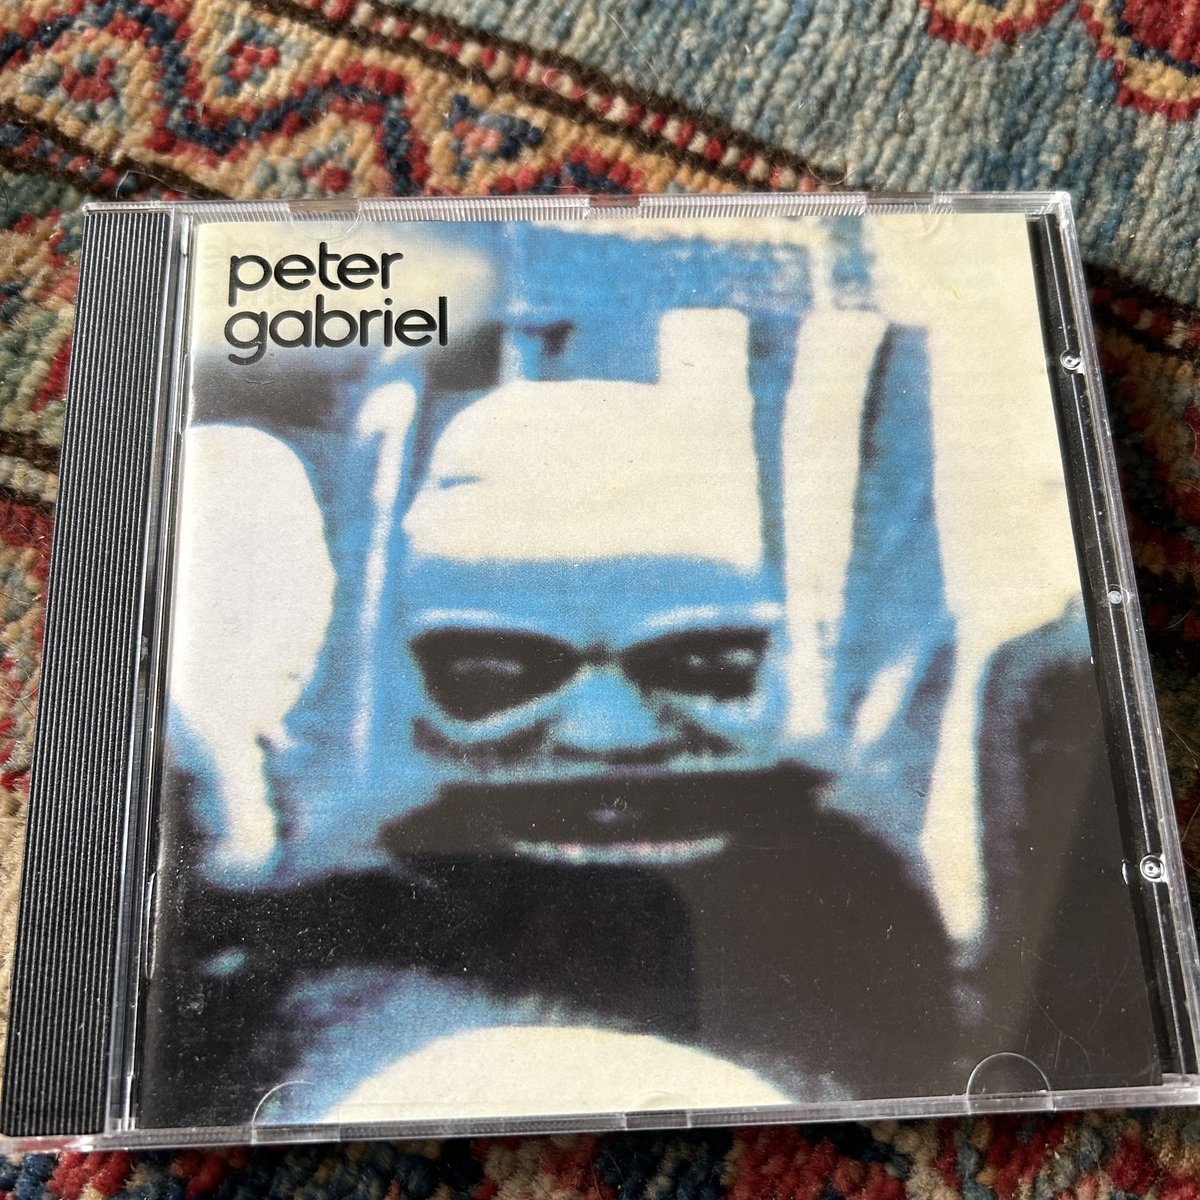 PG3 generally gets all the attention for the invention of that 80s gated drum sound. This also a phenomenal album and @JerryMarotta gives us a drumming master class. 
@itspetergabriel 
#pg3
#security